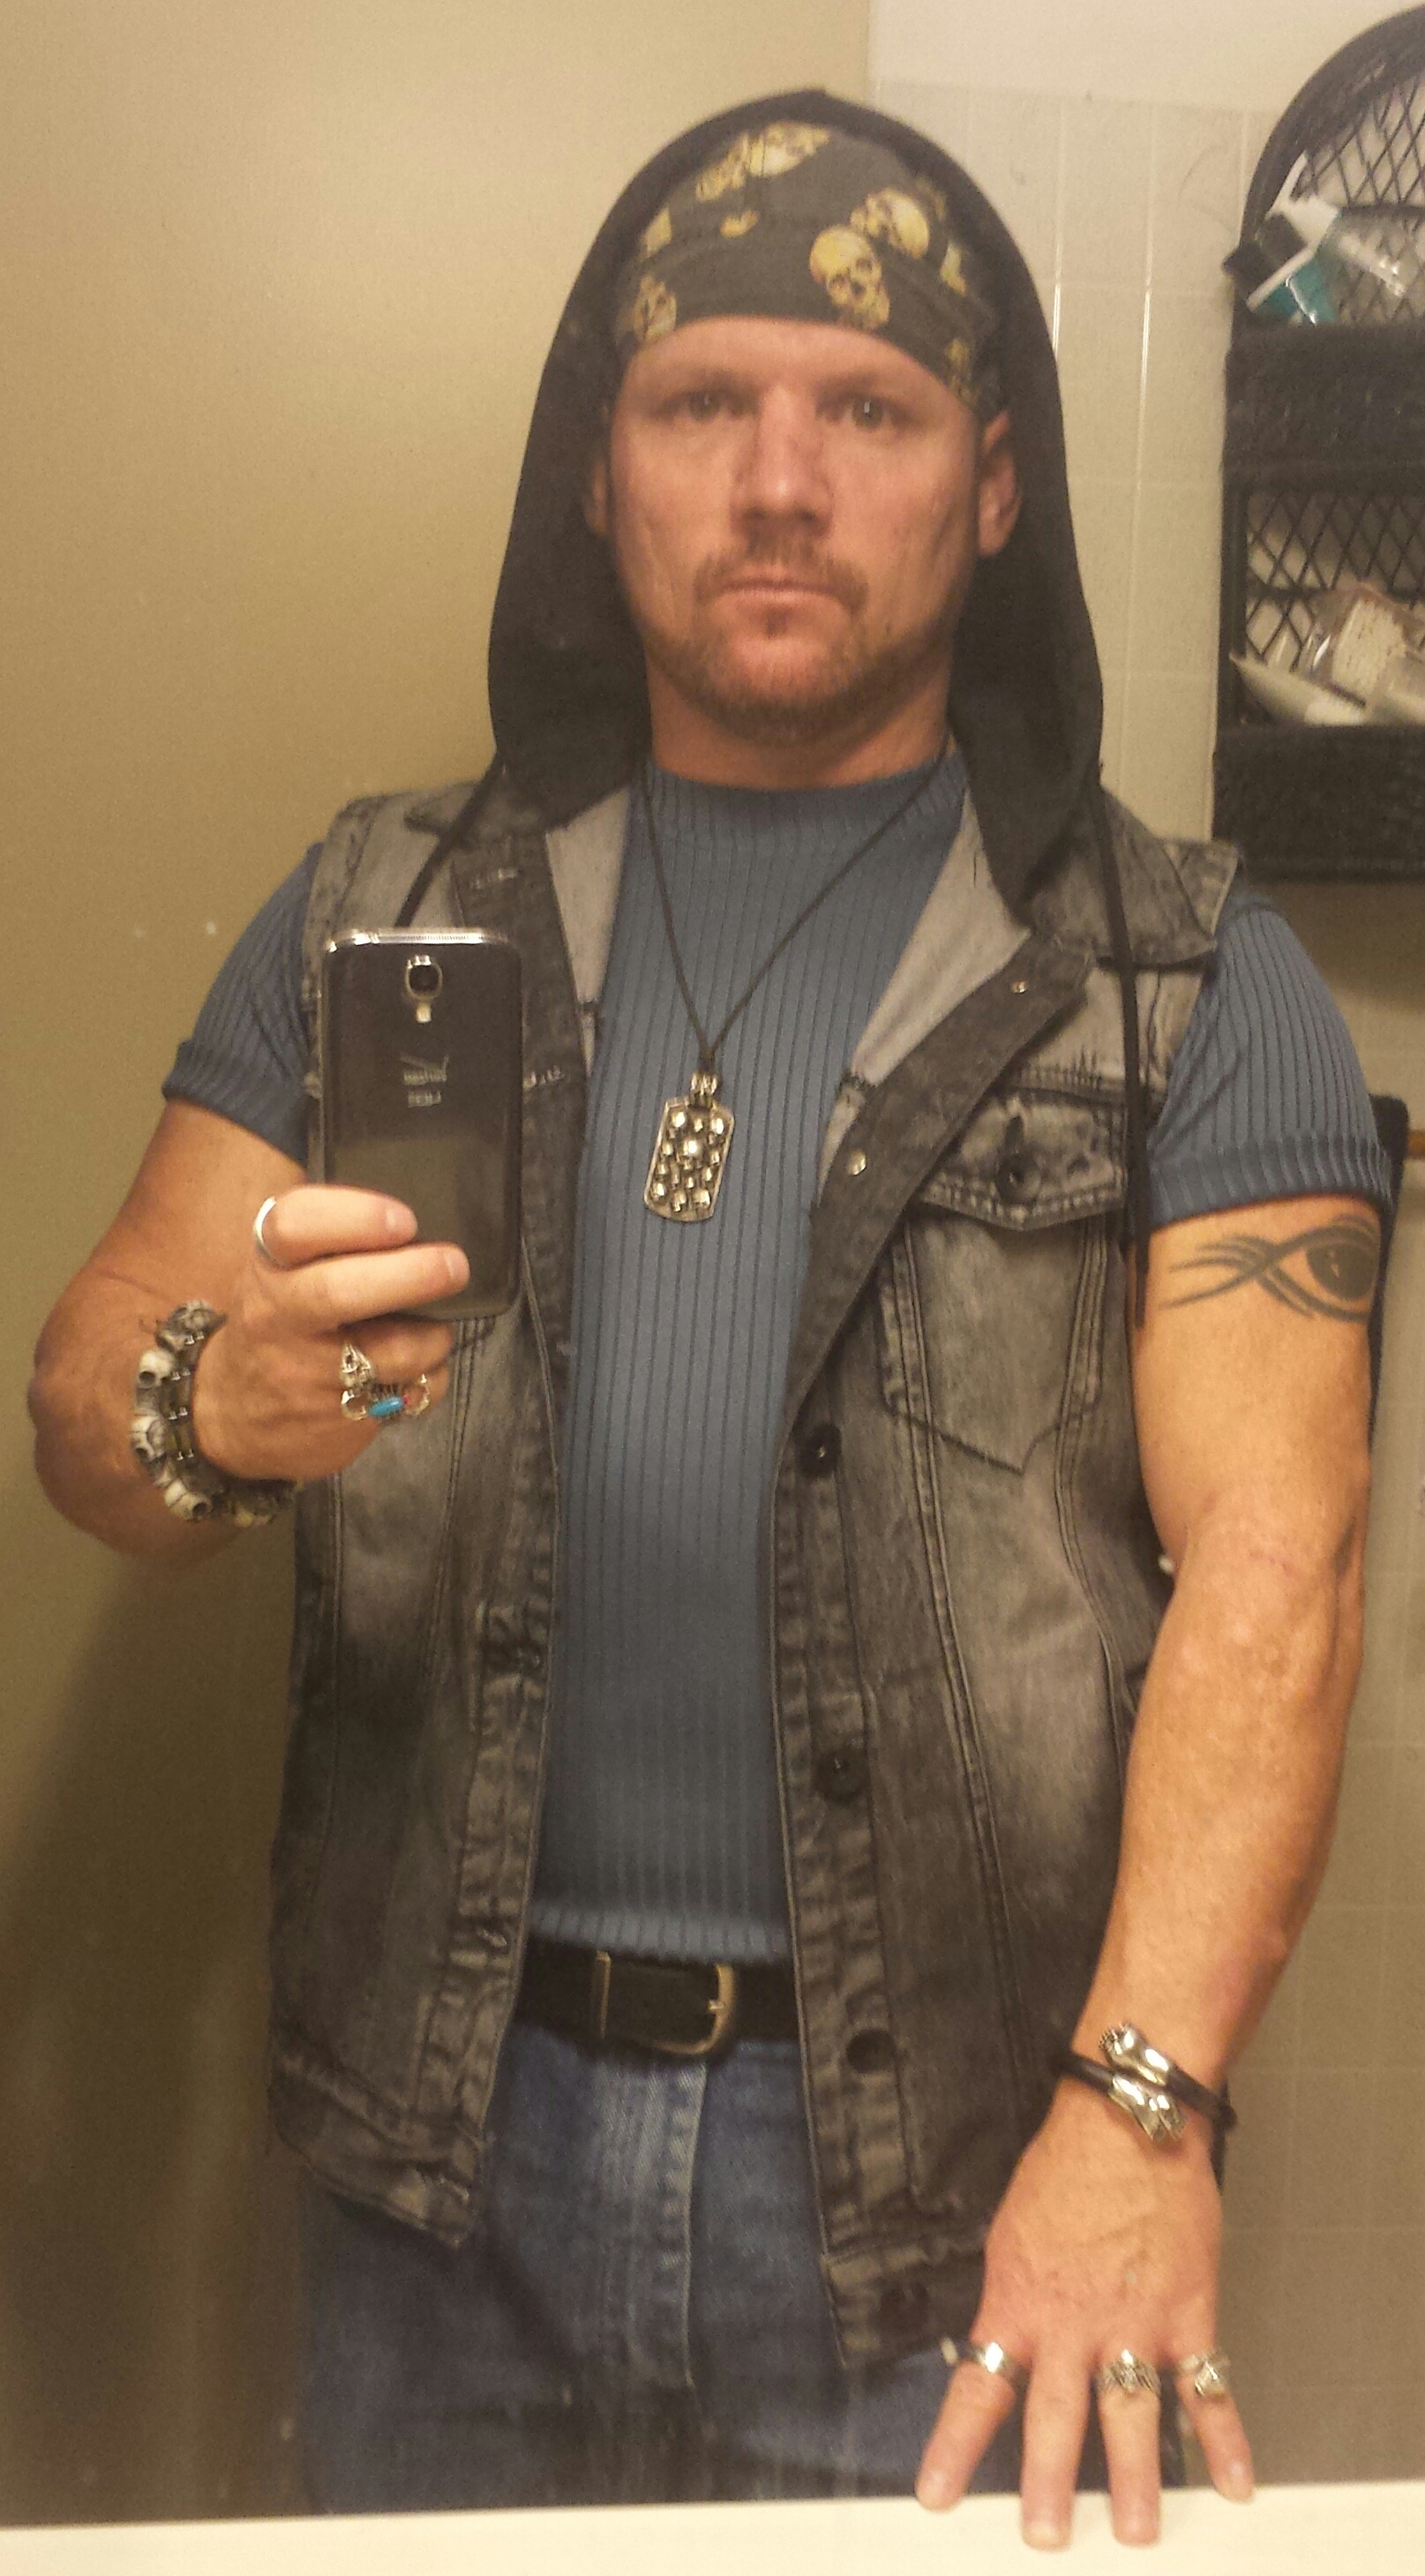 This is my street thug/gang member look that I have used on Brooklyn 99, CSI and numerous other shows.